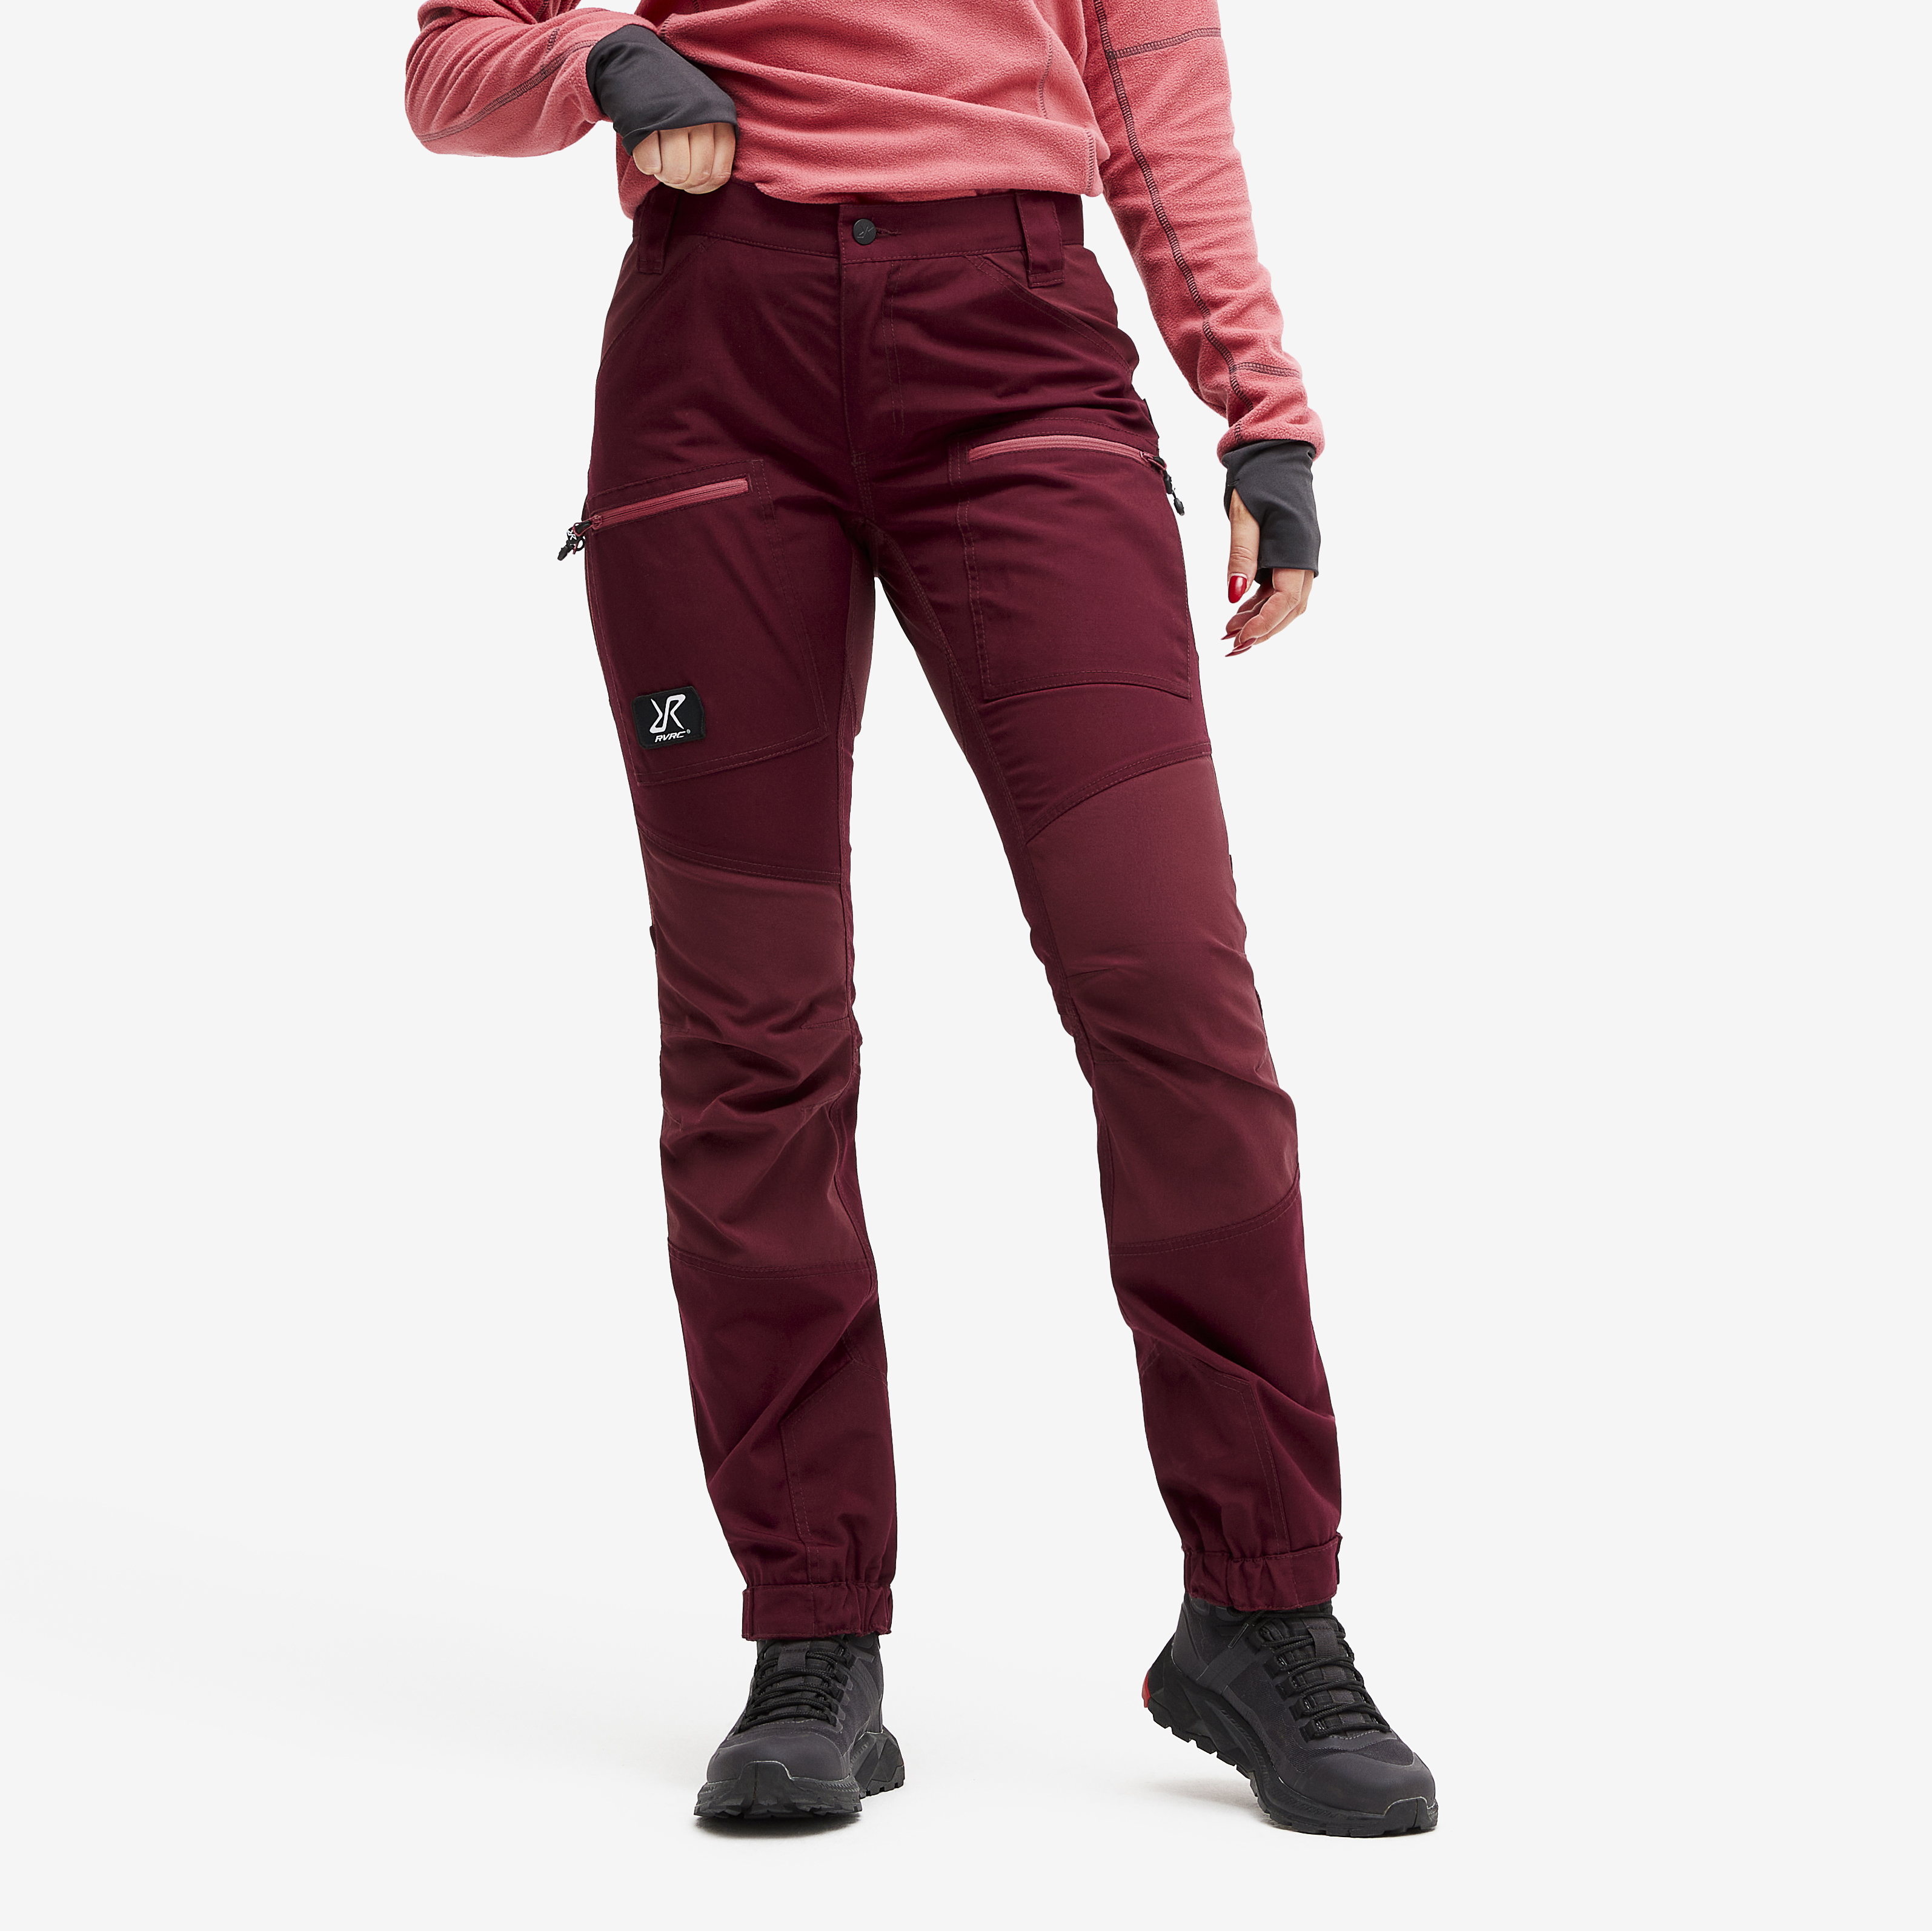 Nordwand Pro Pants Burgundy/Earth Red Dam